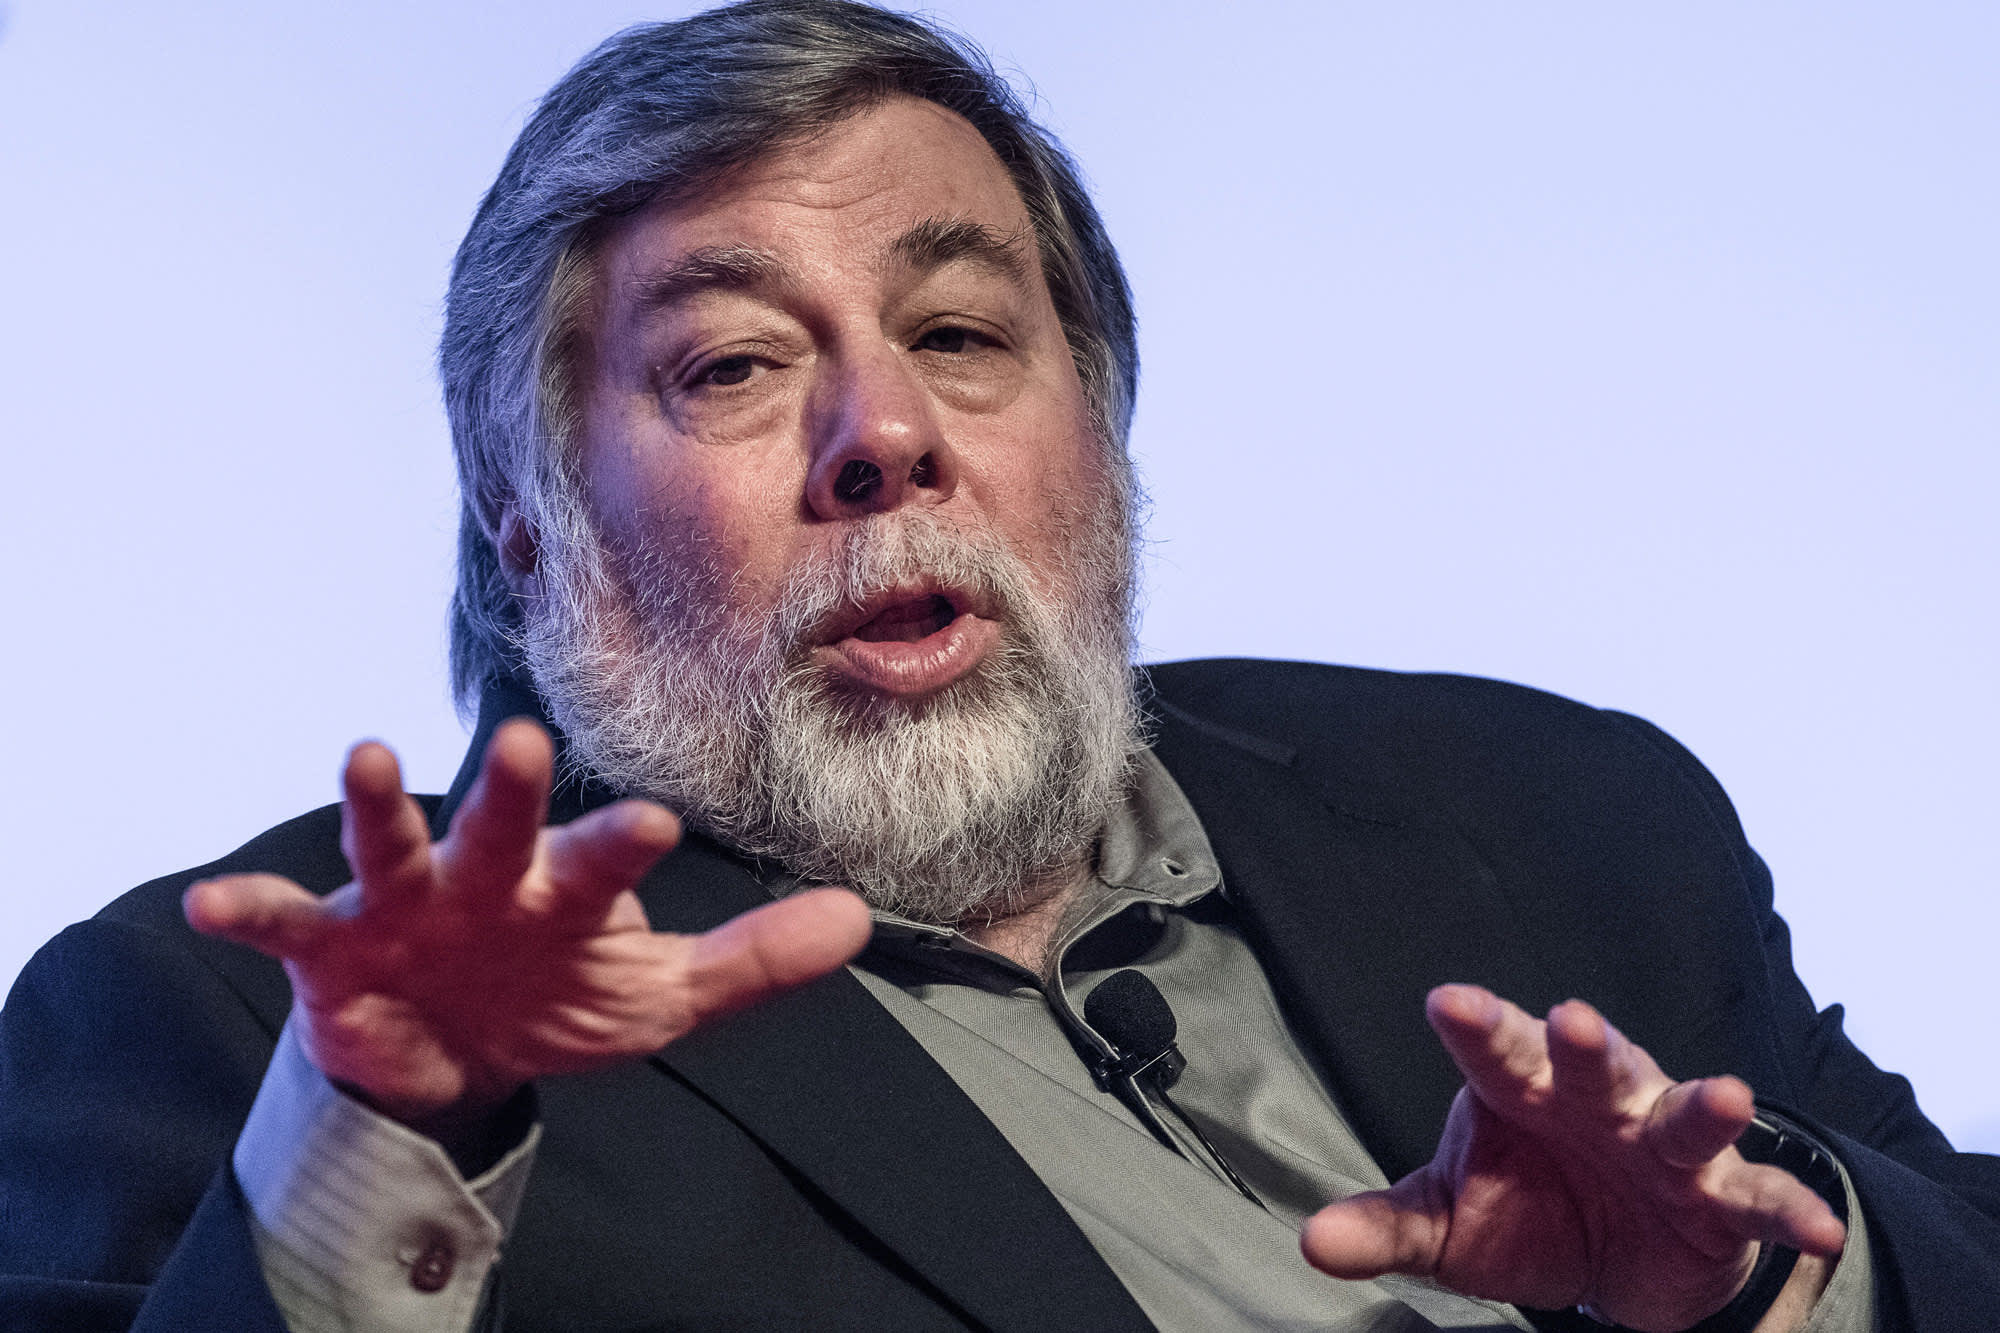 How much equity did Steve Wozniak have?